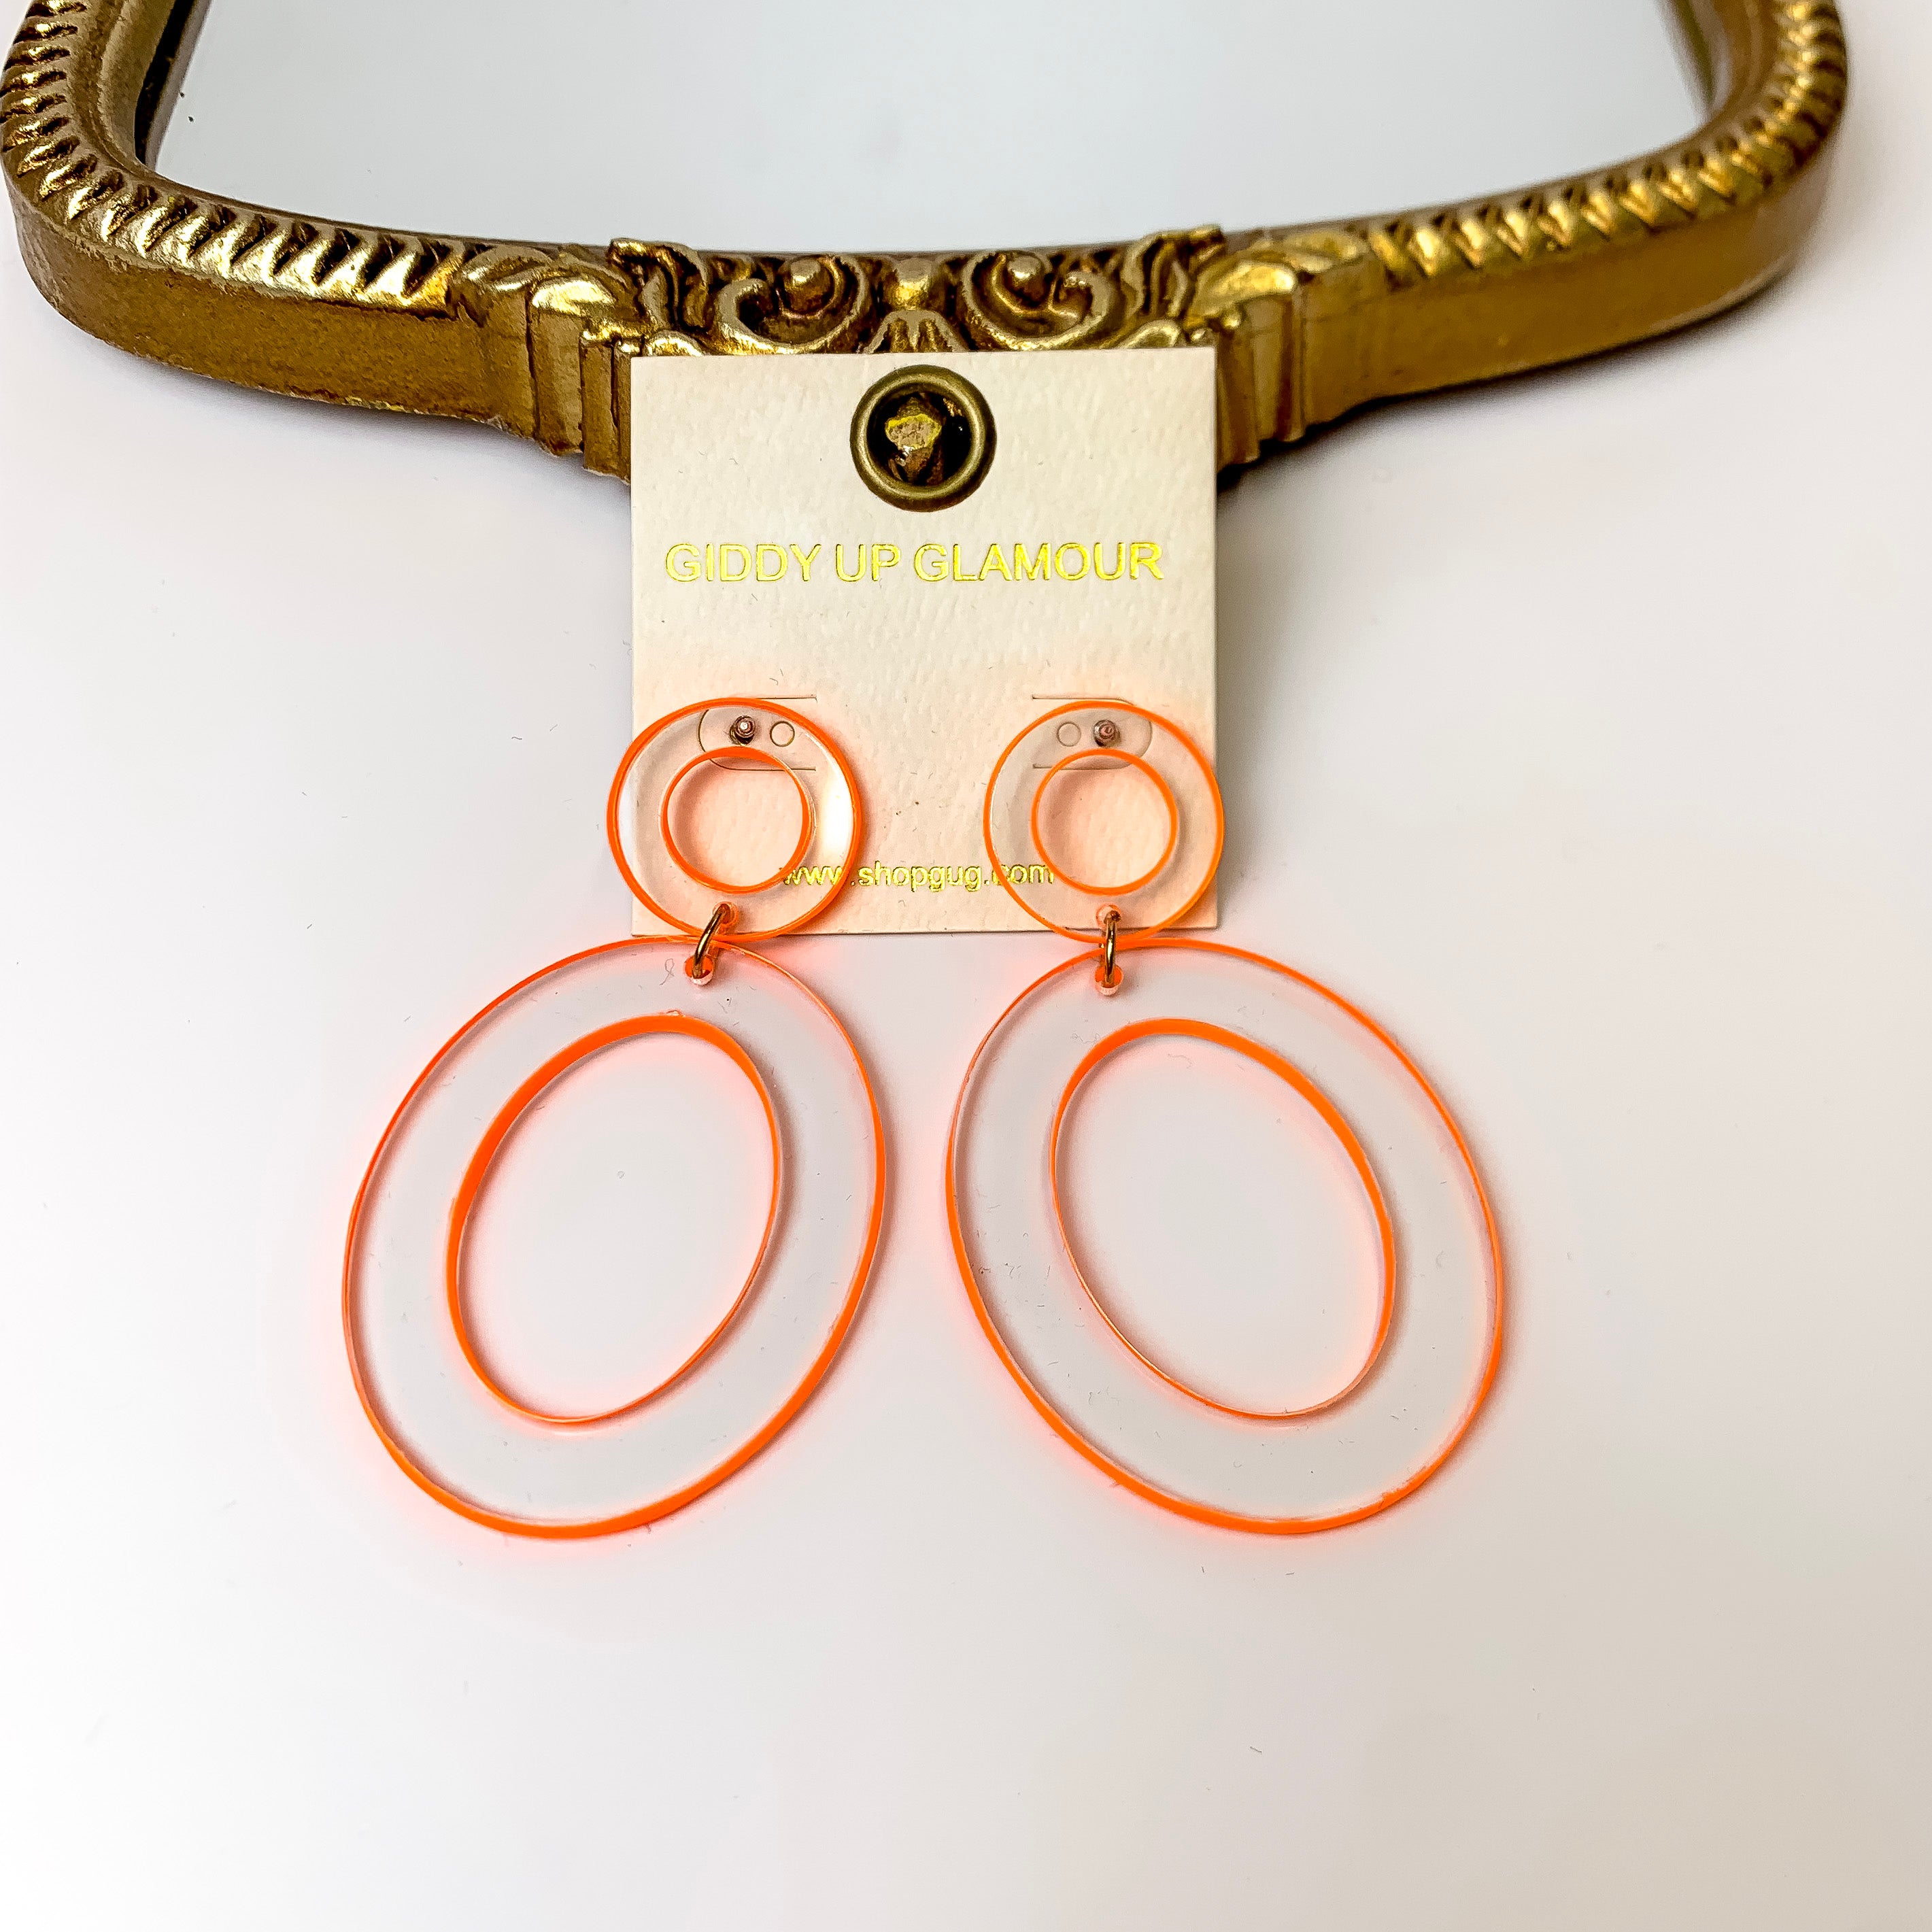 Clear Acrylic Oval Drop Earrings with Neon Orange Trim - Giddy Up Glamour Boutique